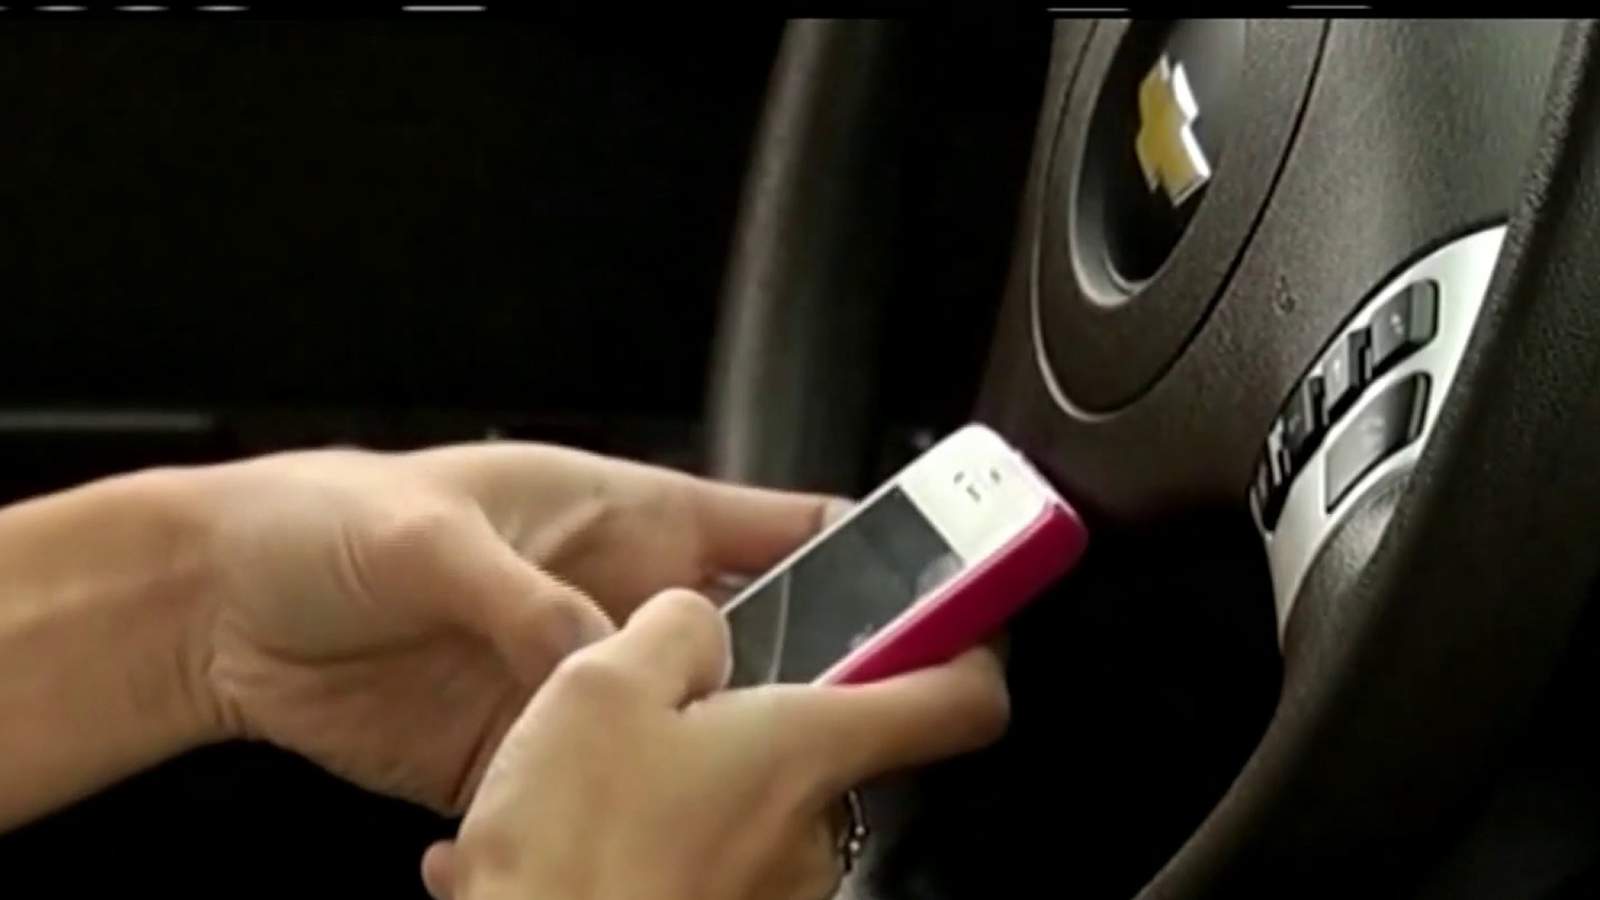 Driving Change: Lawmakers could make Florida ‘hands-free’ statewide